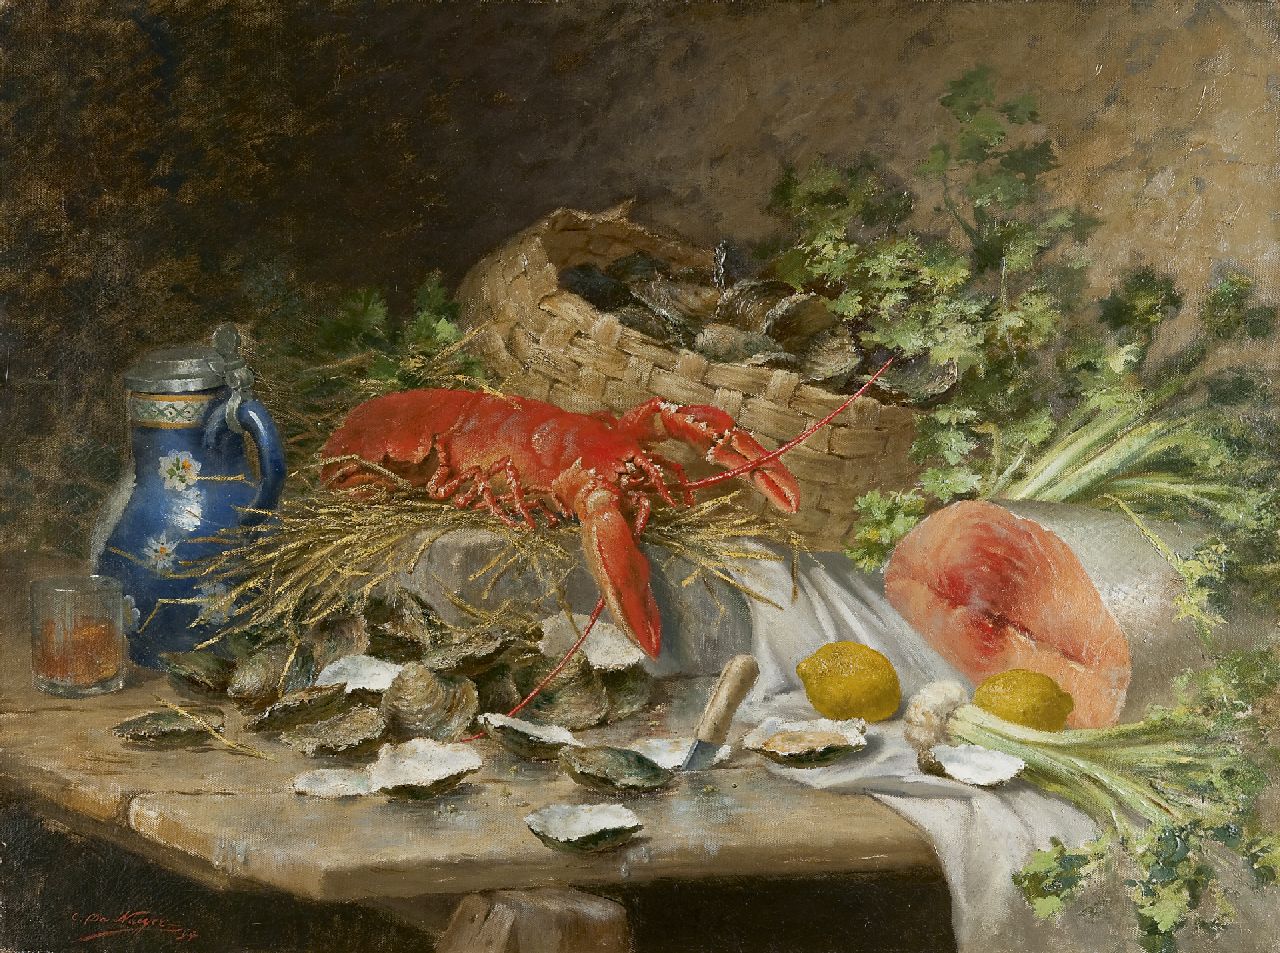 Naeyer C. de | Charles de Naeyer, A still life of a lobster, a salmon and oysters, oil on canvas 75.4 x 100.6 cm, signed l.l. and dated '94